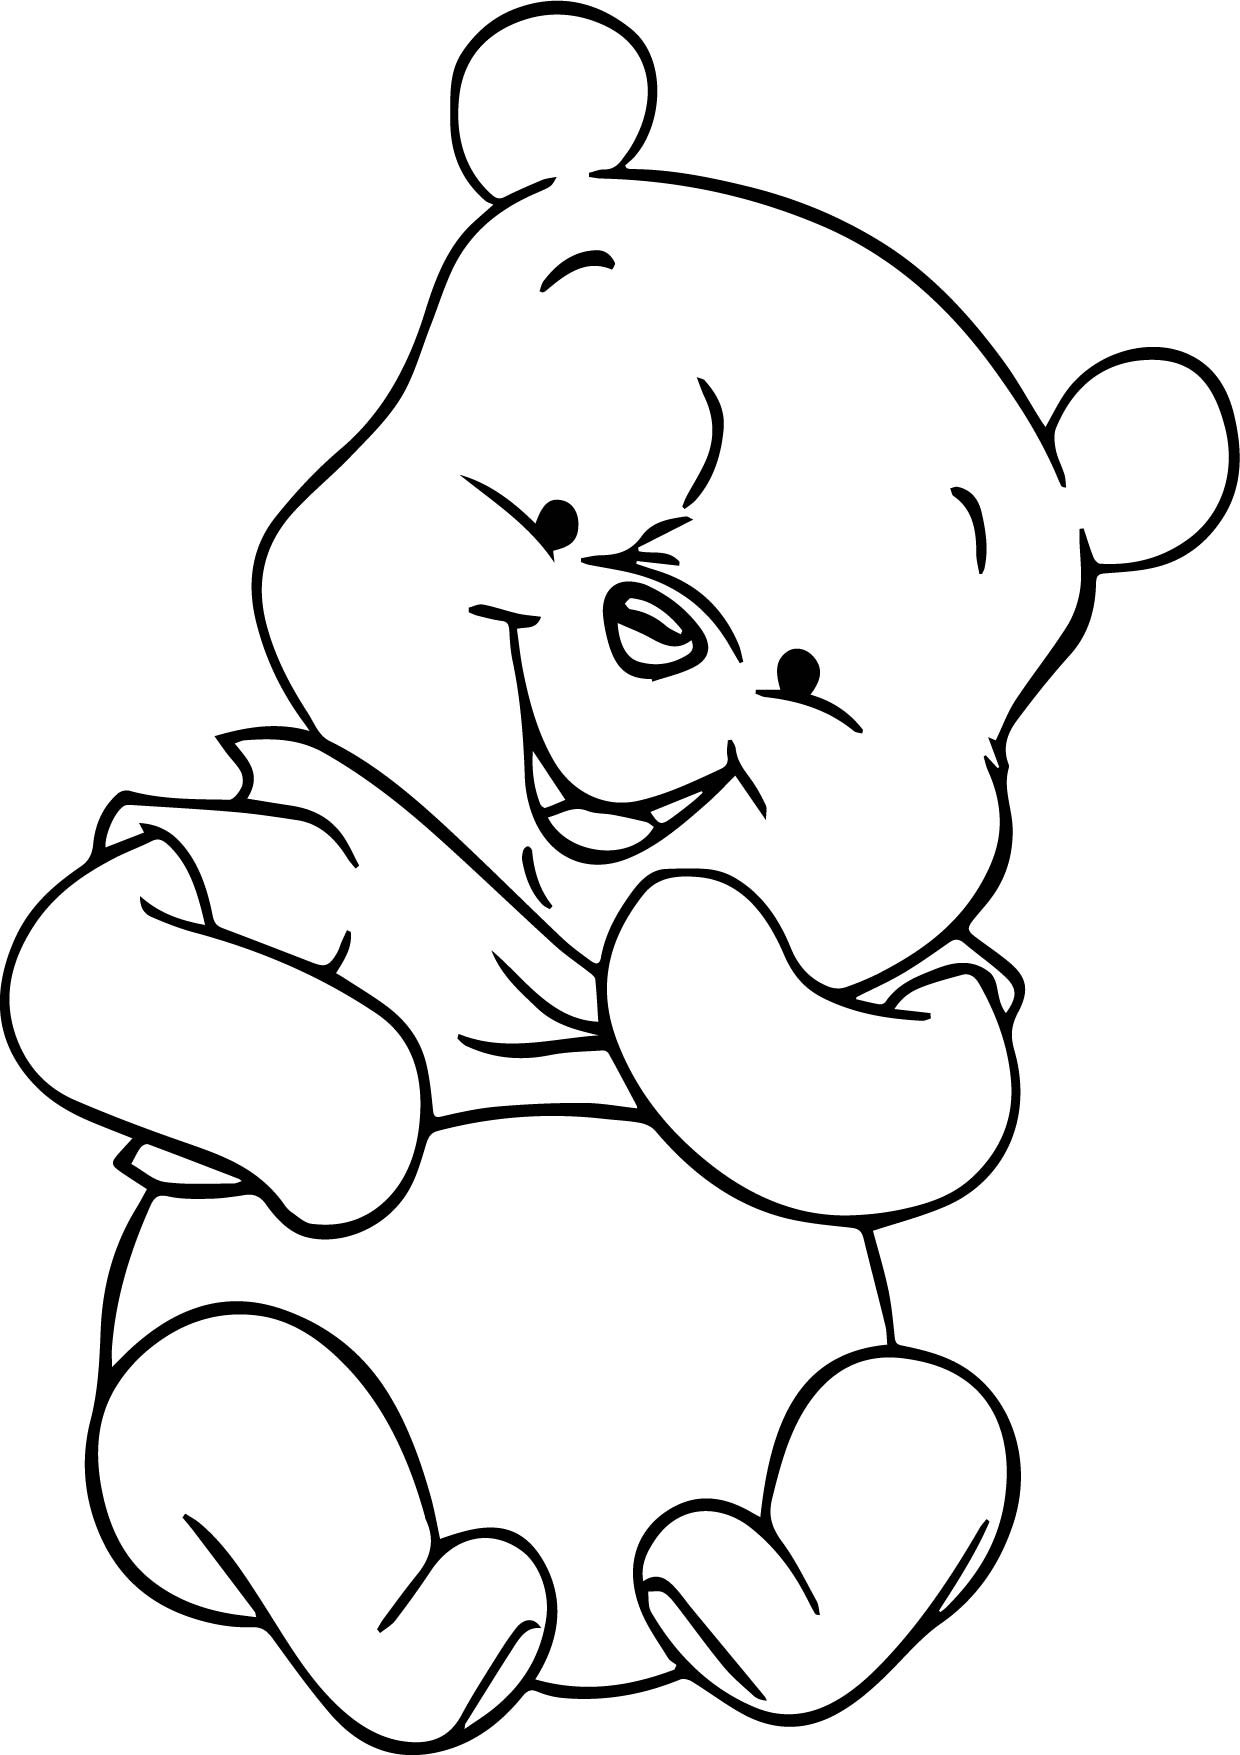 Winnie The Pooh Valentines Day Coloring Pages at GetColorings.com ...